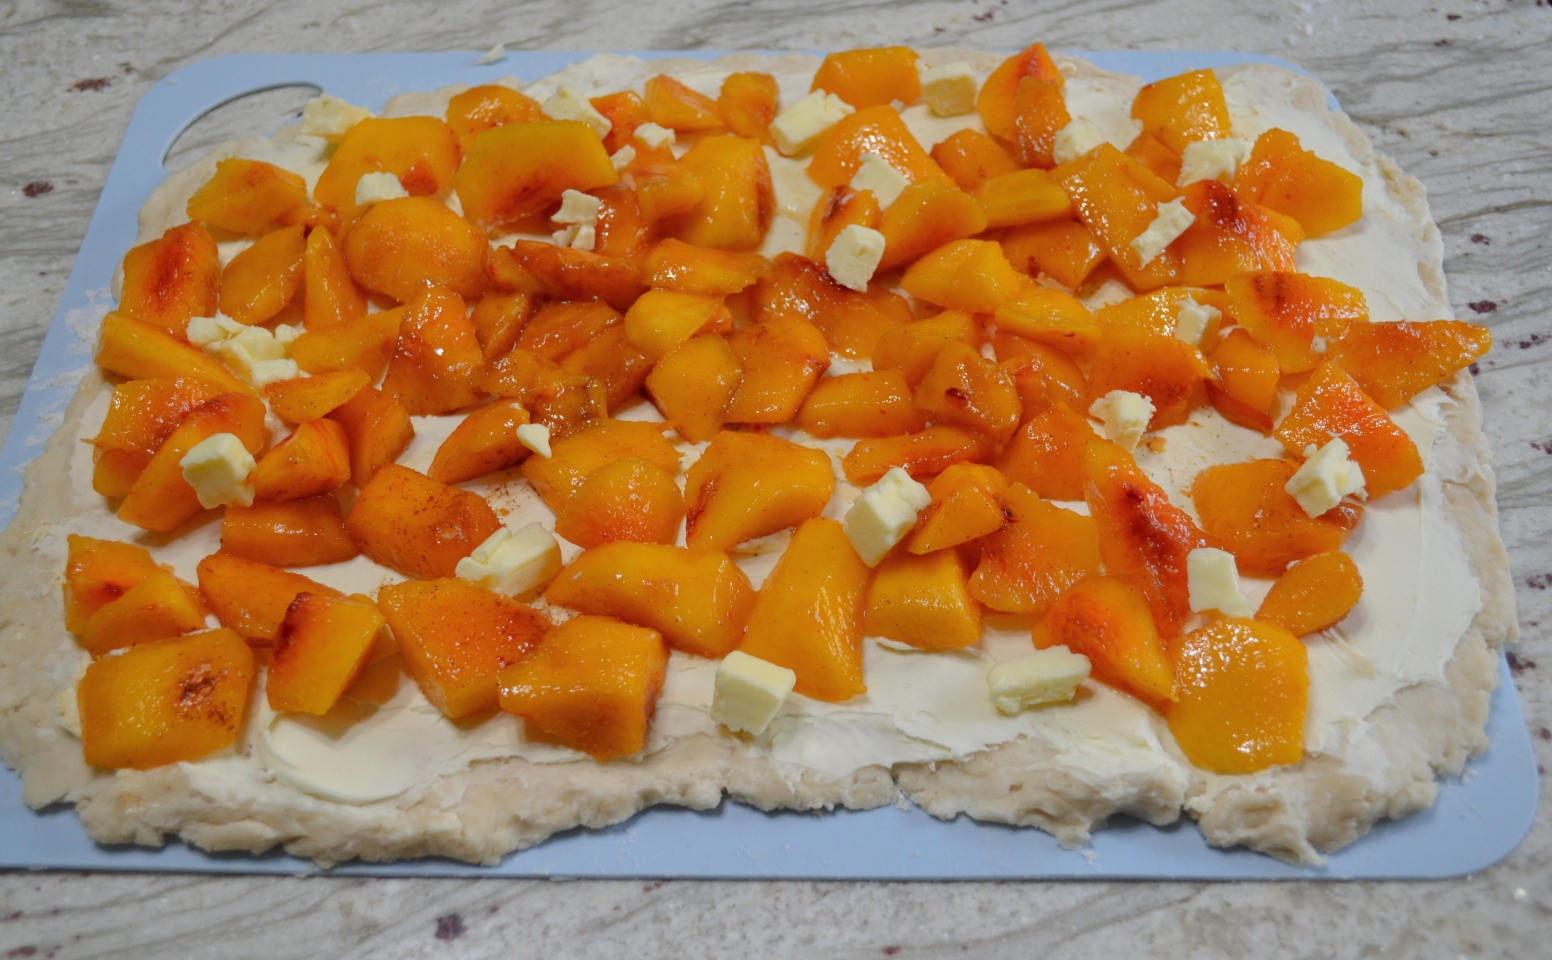 A delicious dessert made with fresh peaches and mascarpone cheese, rolled up in a shortbread crust. Baked in a simple syrup then drizzled with a mascarpone glaze.